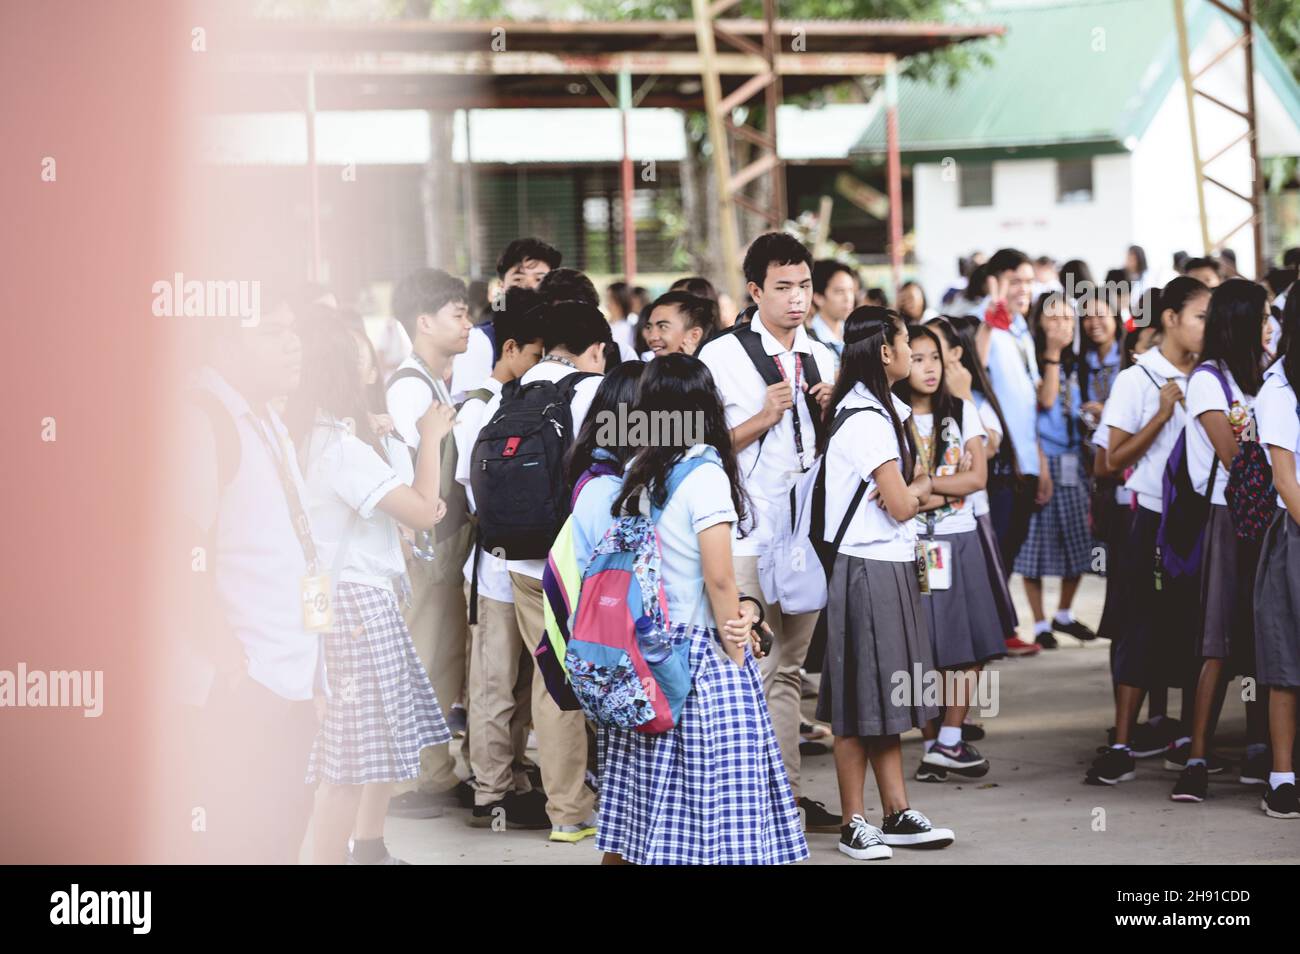 SCHOOL CHILDREN IN A FILIPINO SCHOOL WAITING FOR CLASS, PHILIPPINES - Jan 01, 2019: A view of the Filipino school children waiting for class to start Stock Photo